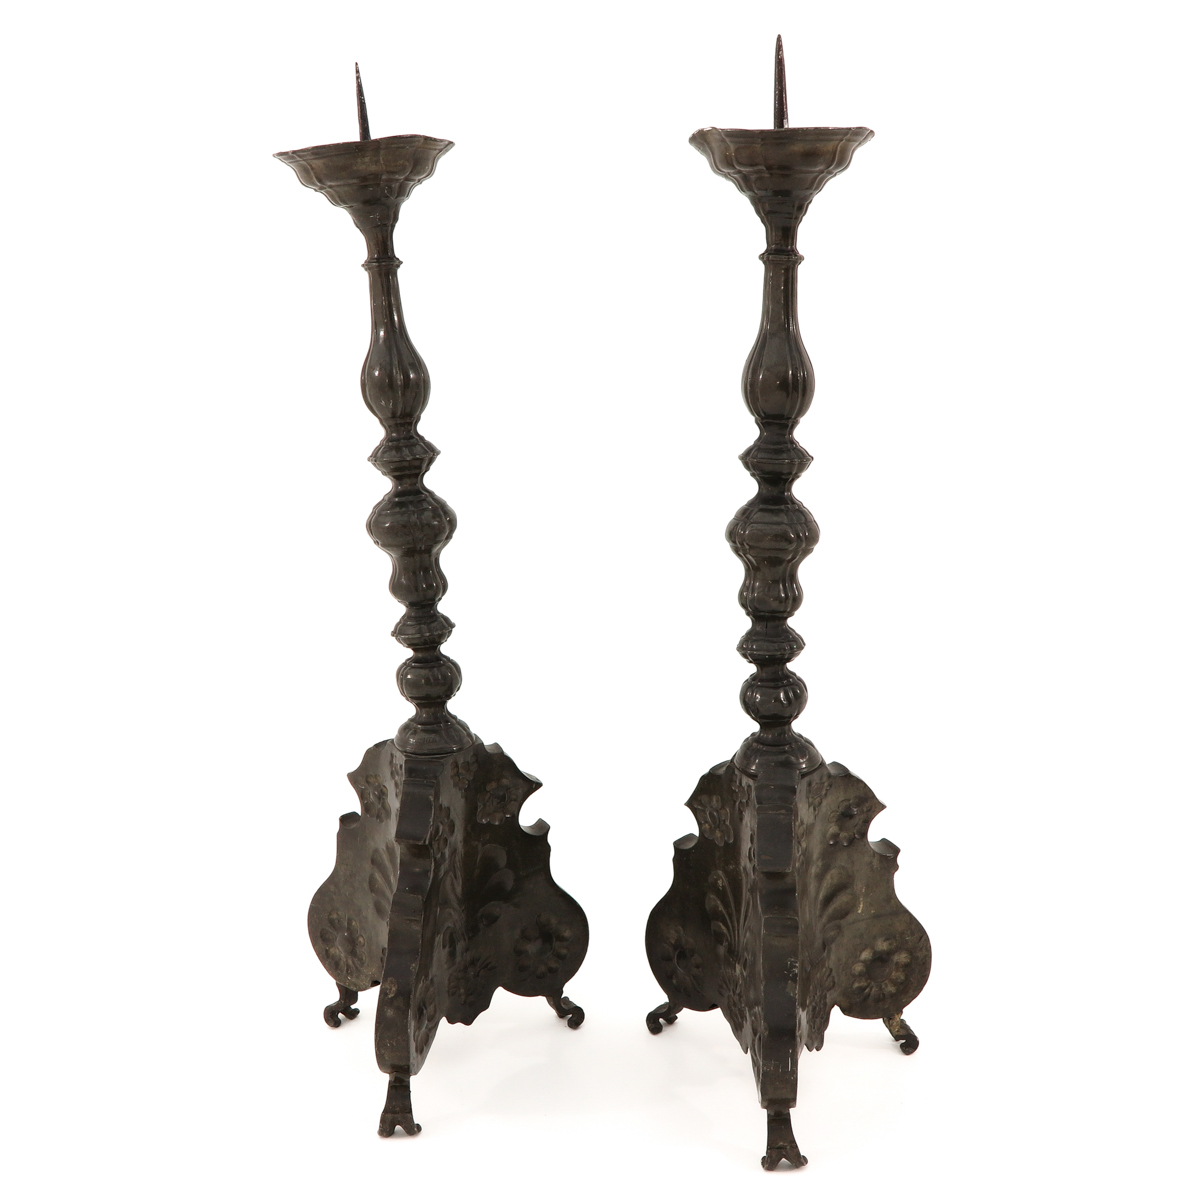 A Pair of 18th - 19th Century Candlesticks - Image 4 of 9